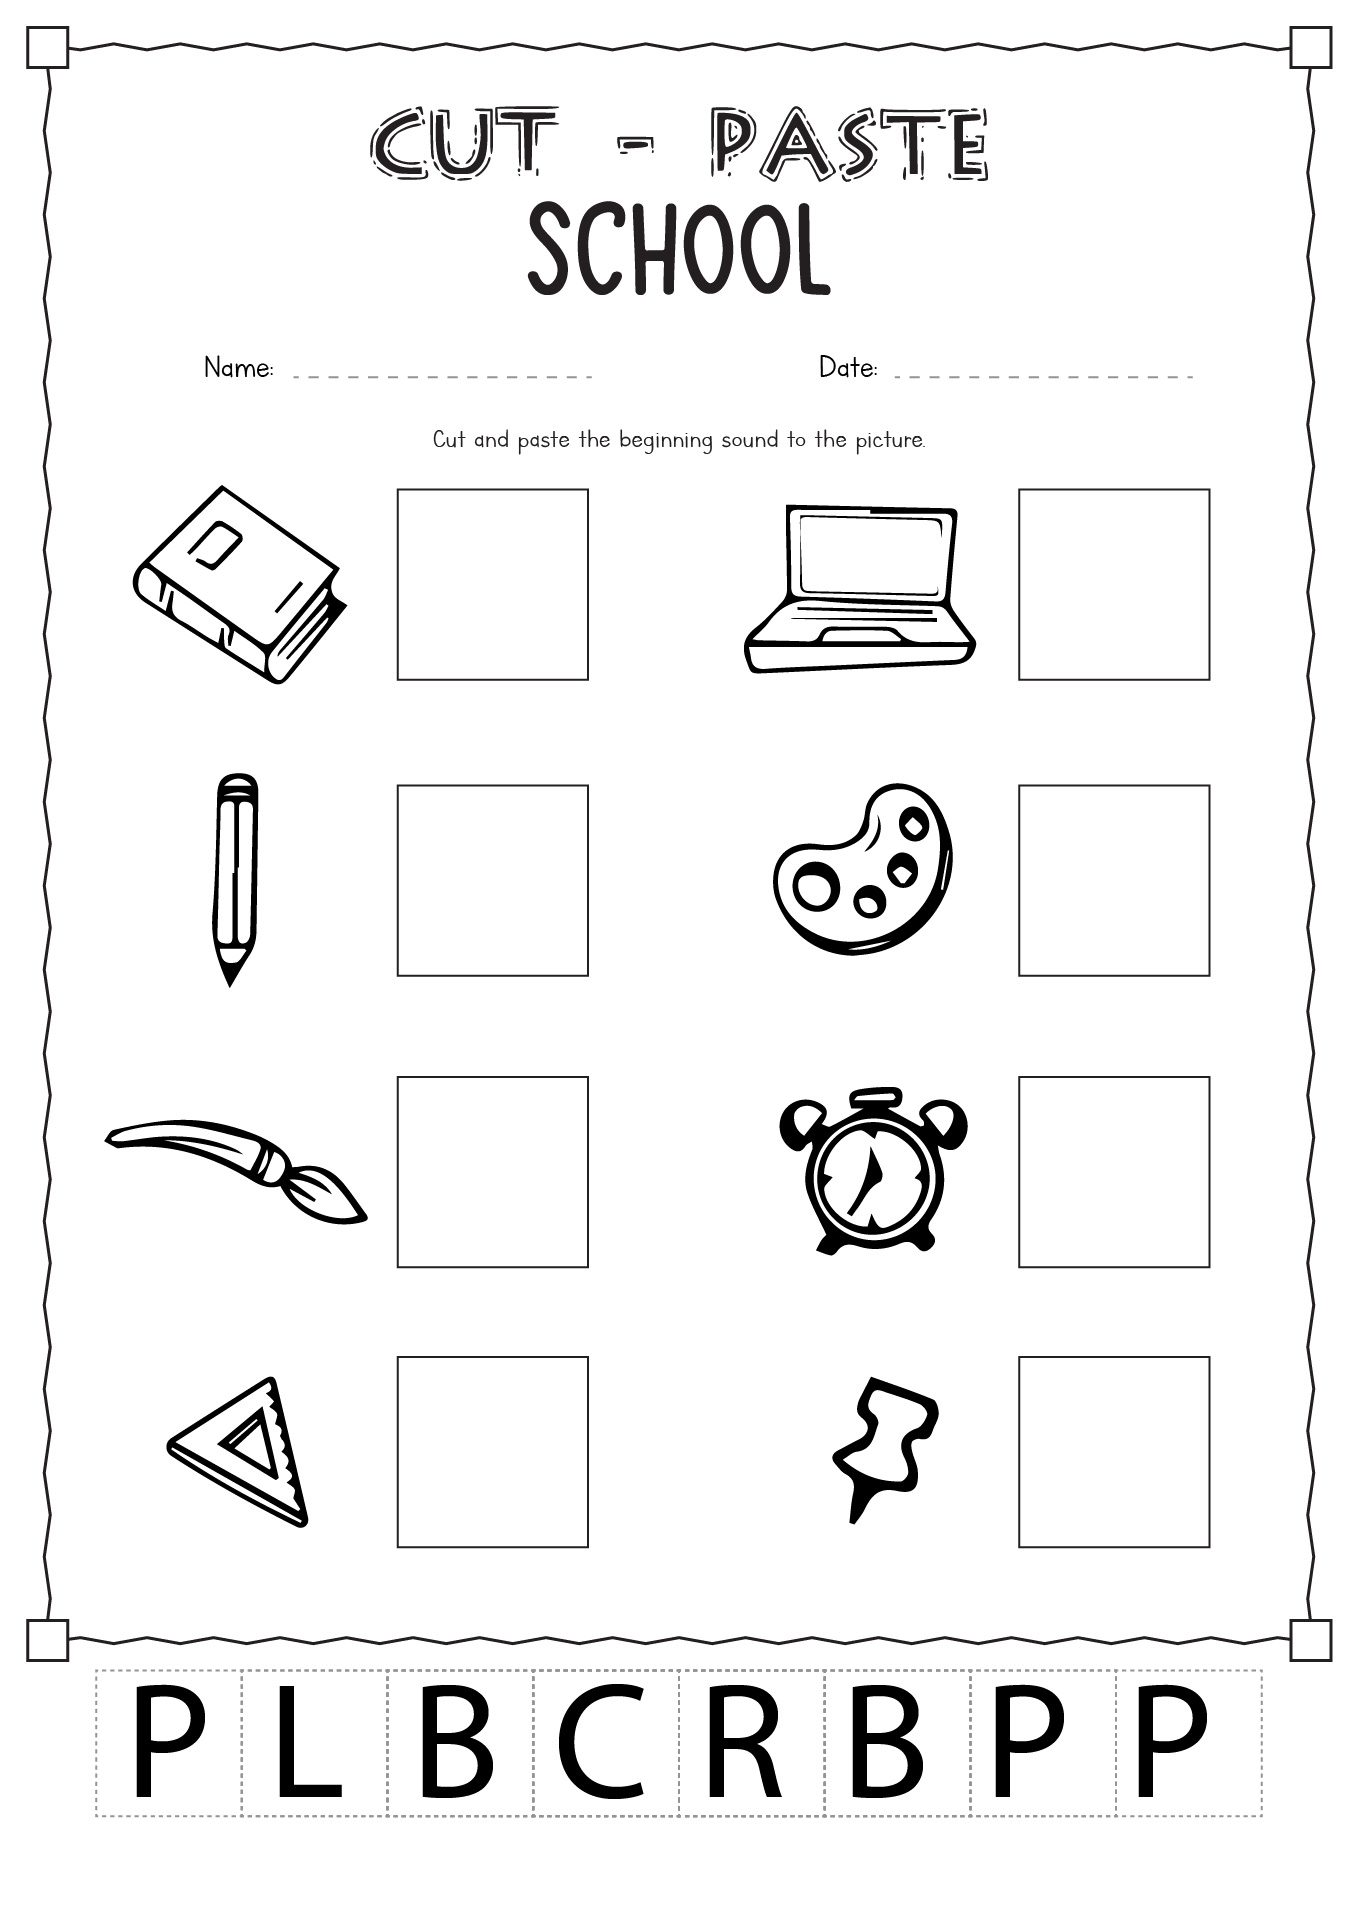 Free Printable Cut and Paste Worksheets Image